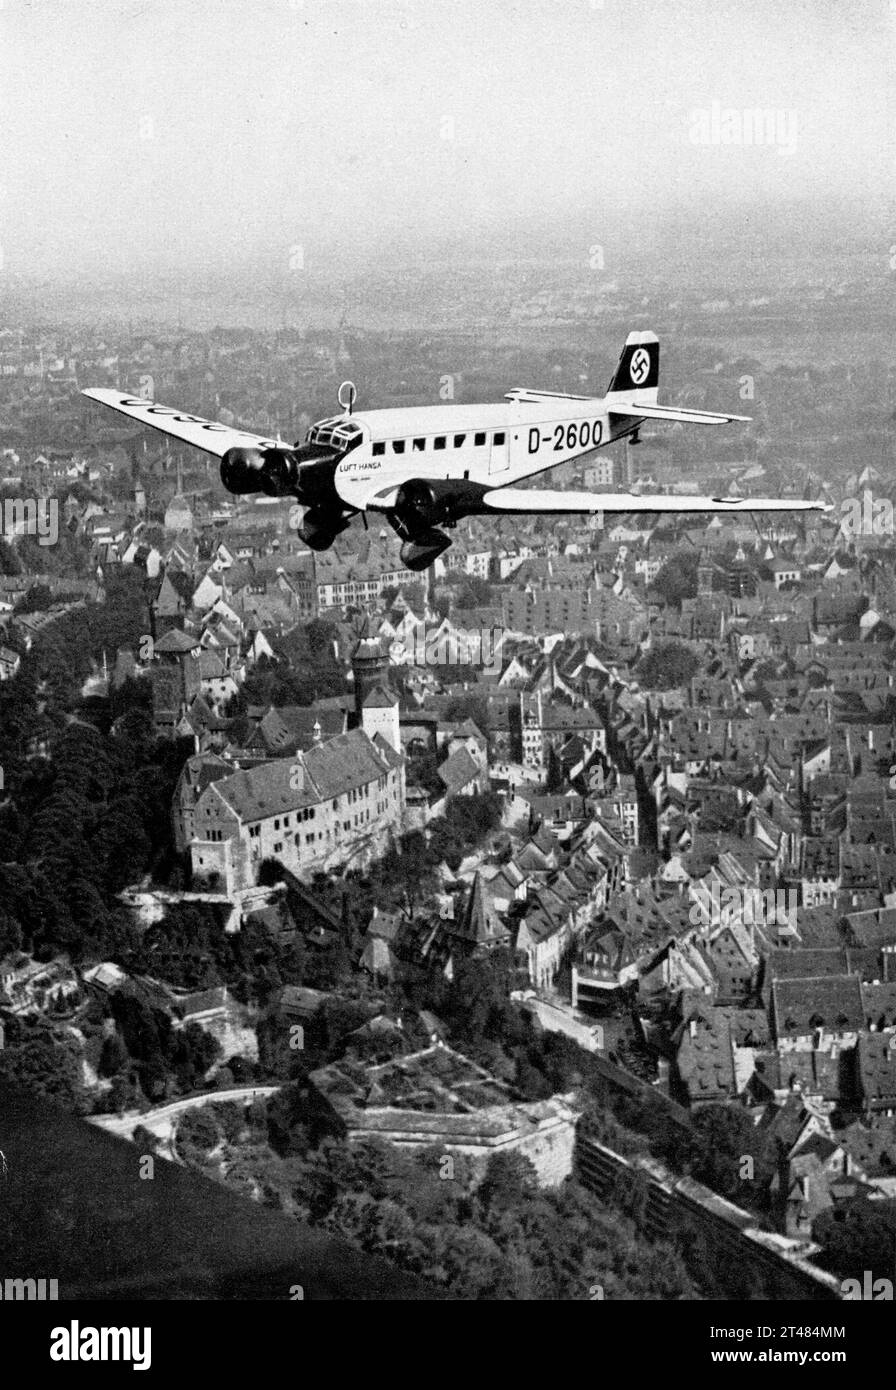 ADOLF HITLER flies over Nuremburg / Nurnberg in his first private aeroplane Junker JU 52/3m registration number D-2600 as he arrives for the 1934 6th Nazi Party Congress on 5th September as seen in TRIUMPH DES WILLENS / TRIUMPH OF THE WILL 1935 director / producer / editor / co-writer LENI RIEFENSTAHL music Herbert Windt Leni Riefenstahl-Produktion / Reichspropagandaleitung / Universum Film (UFA) Stock Photo